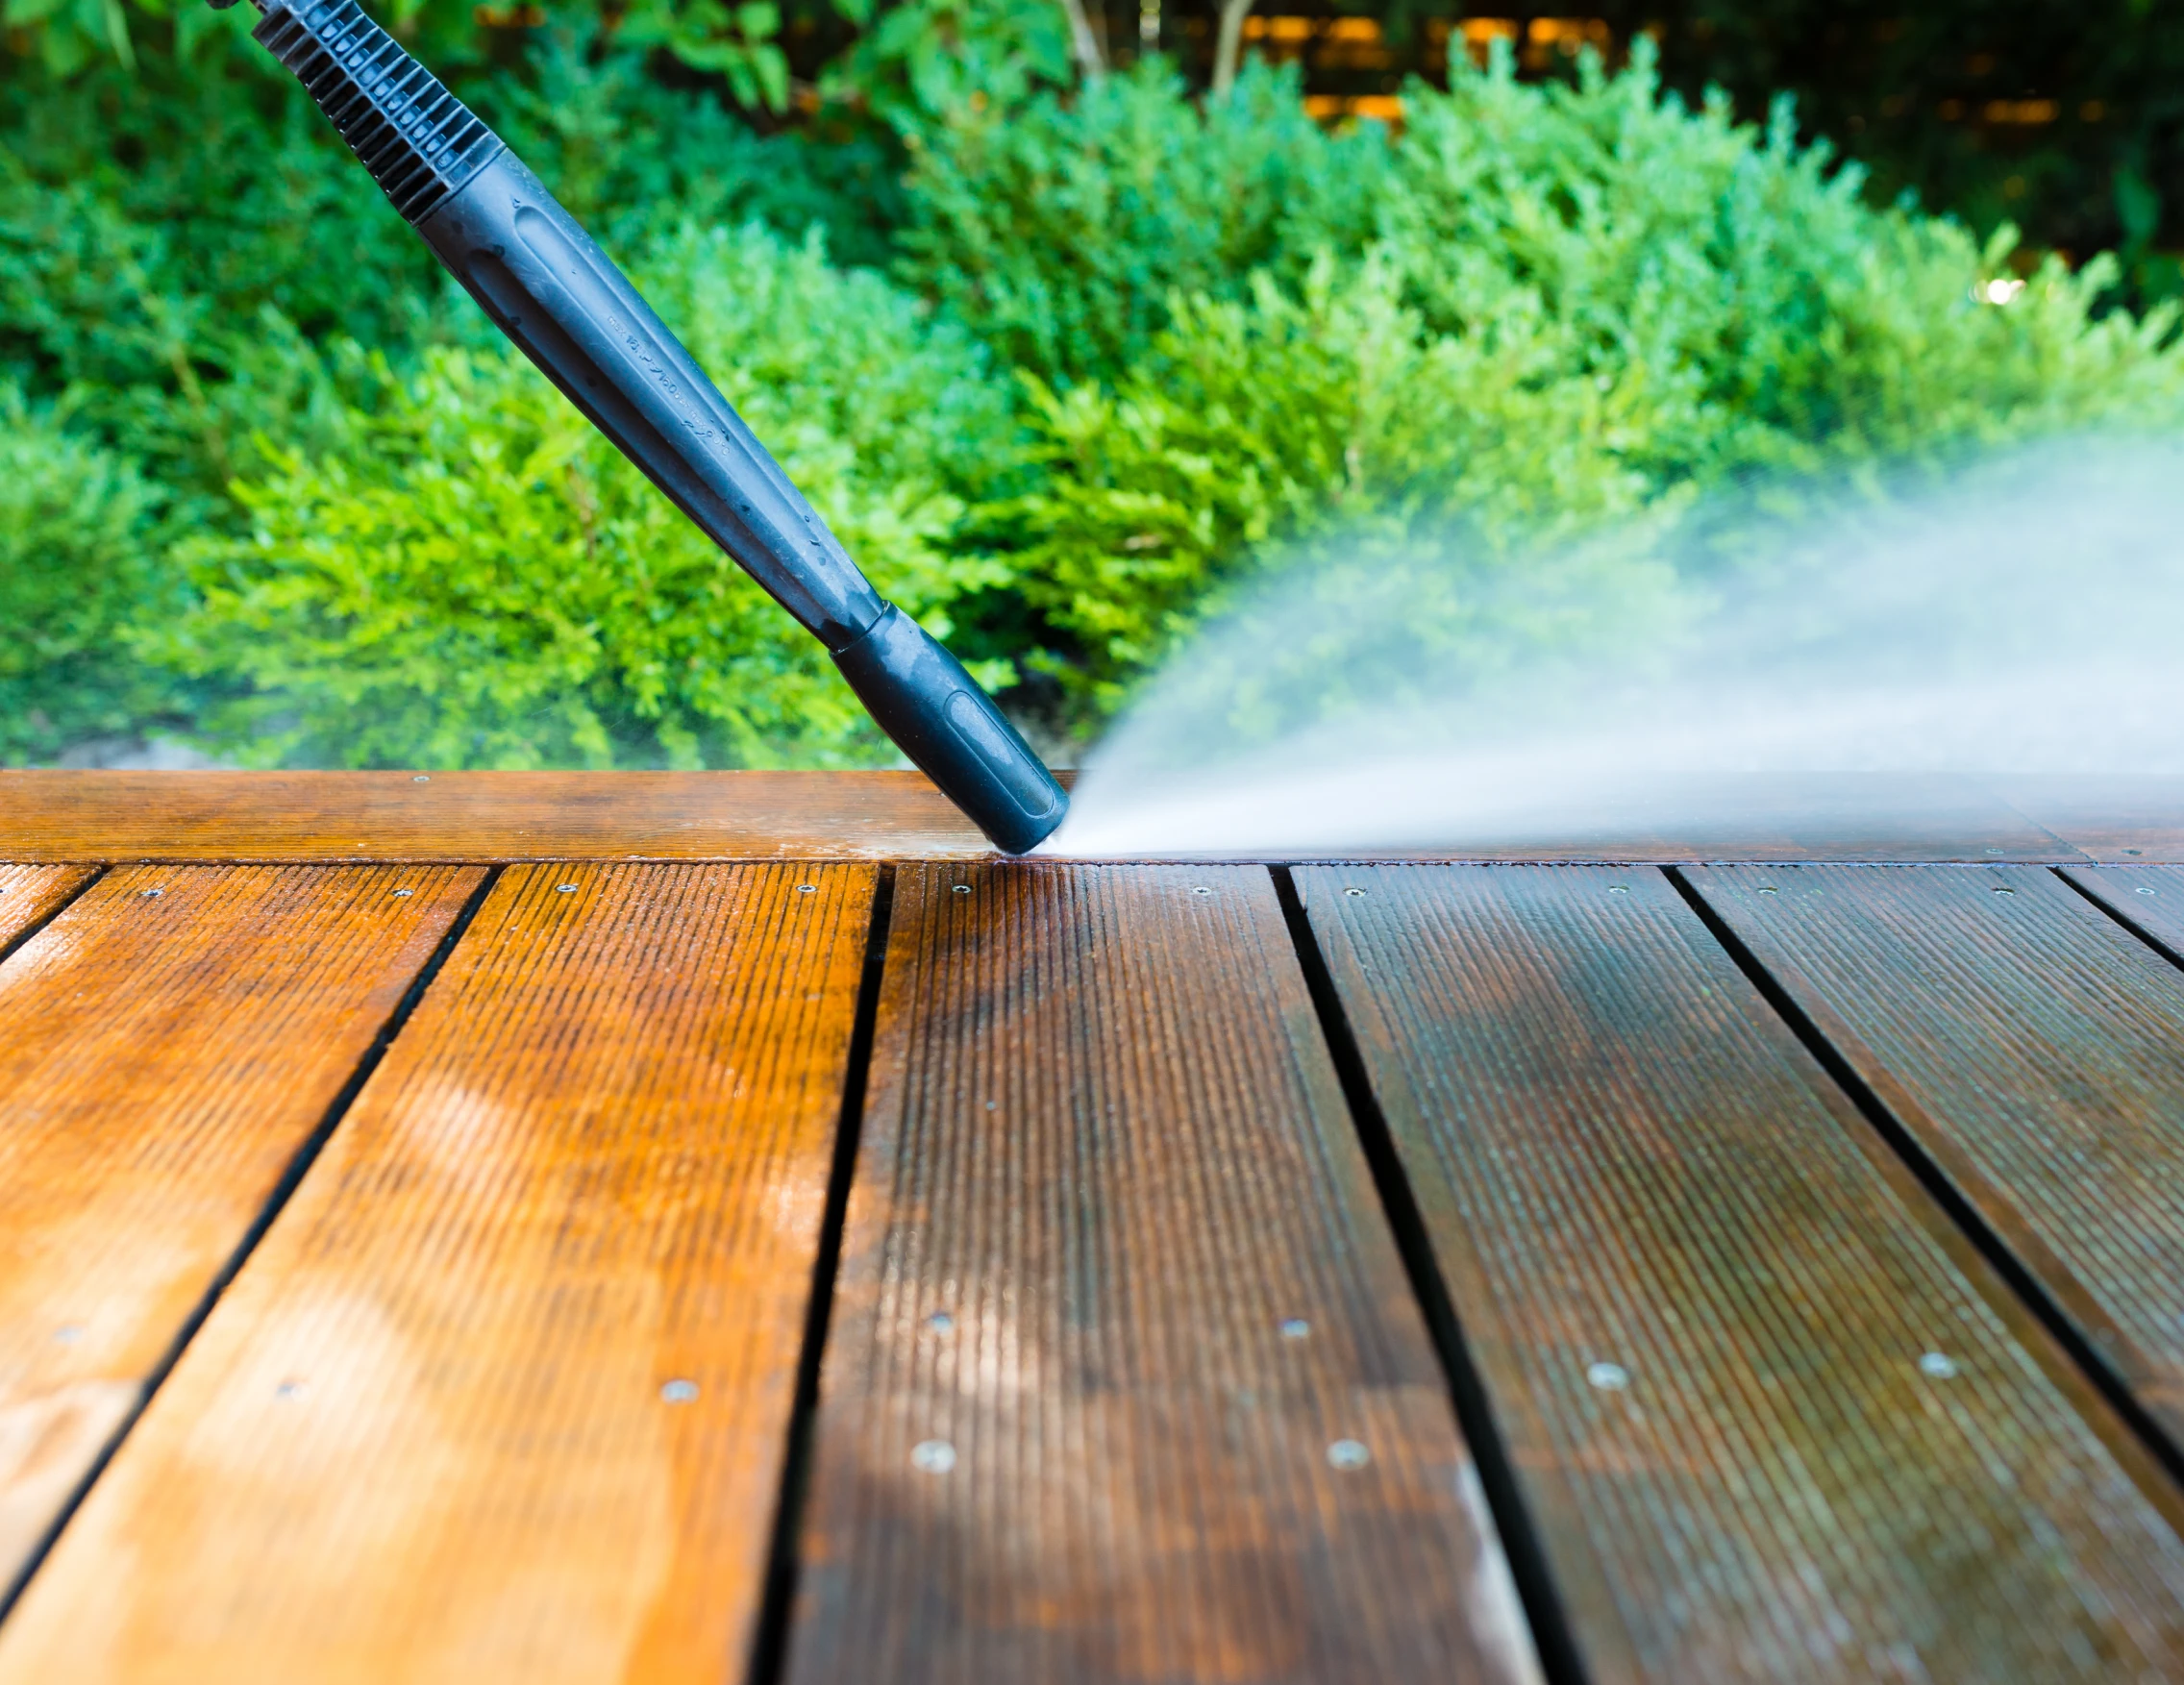 stock-photo-cleaning-terrace-with-a-power-washer-high-water-pressure-cleaner-on-wooden-terrace-surface-1887639460